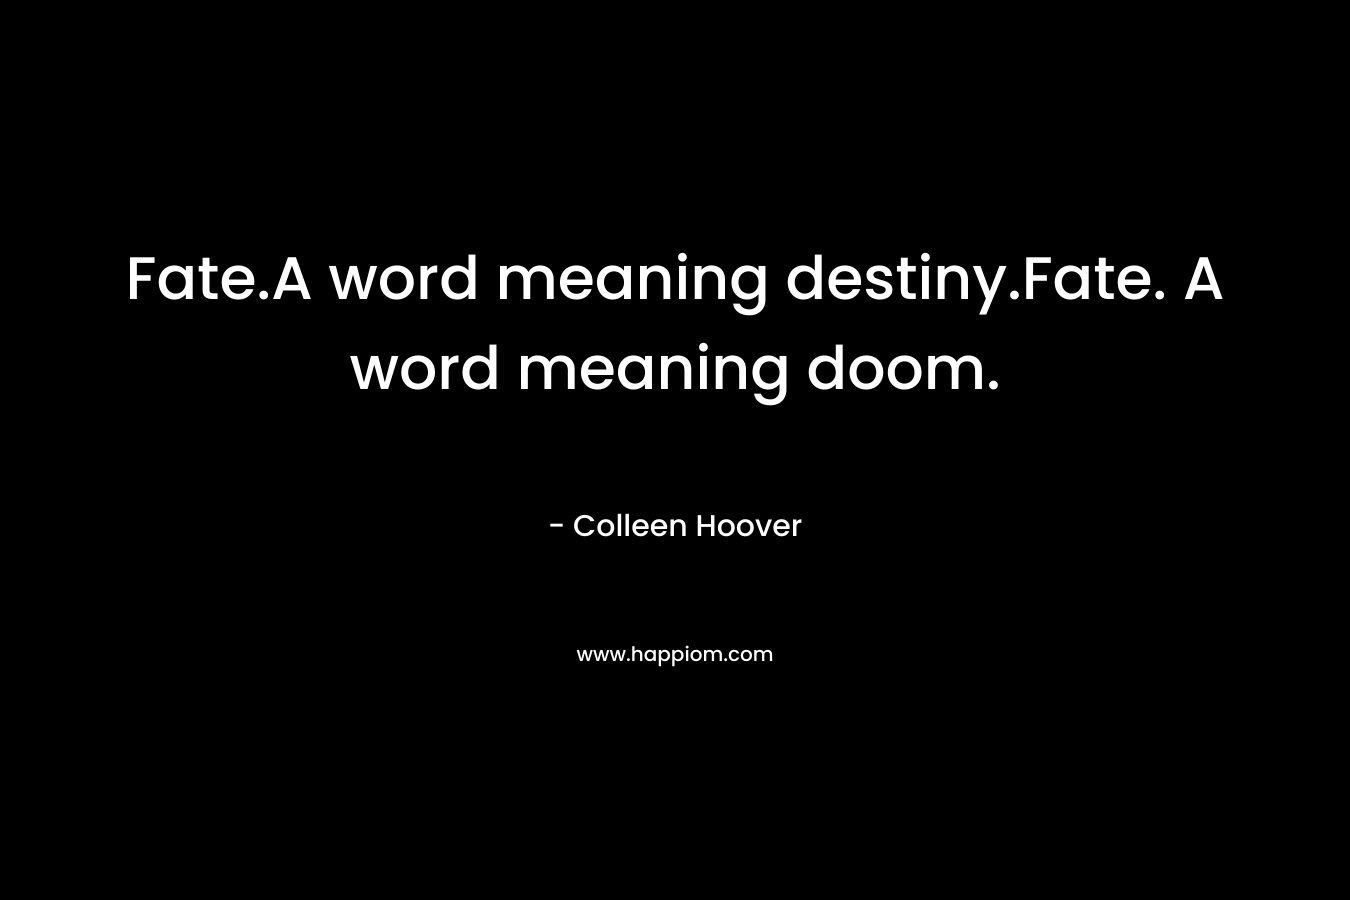 Fate.A word meaning destiny.Fate. A word meaning doom.